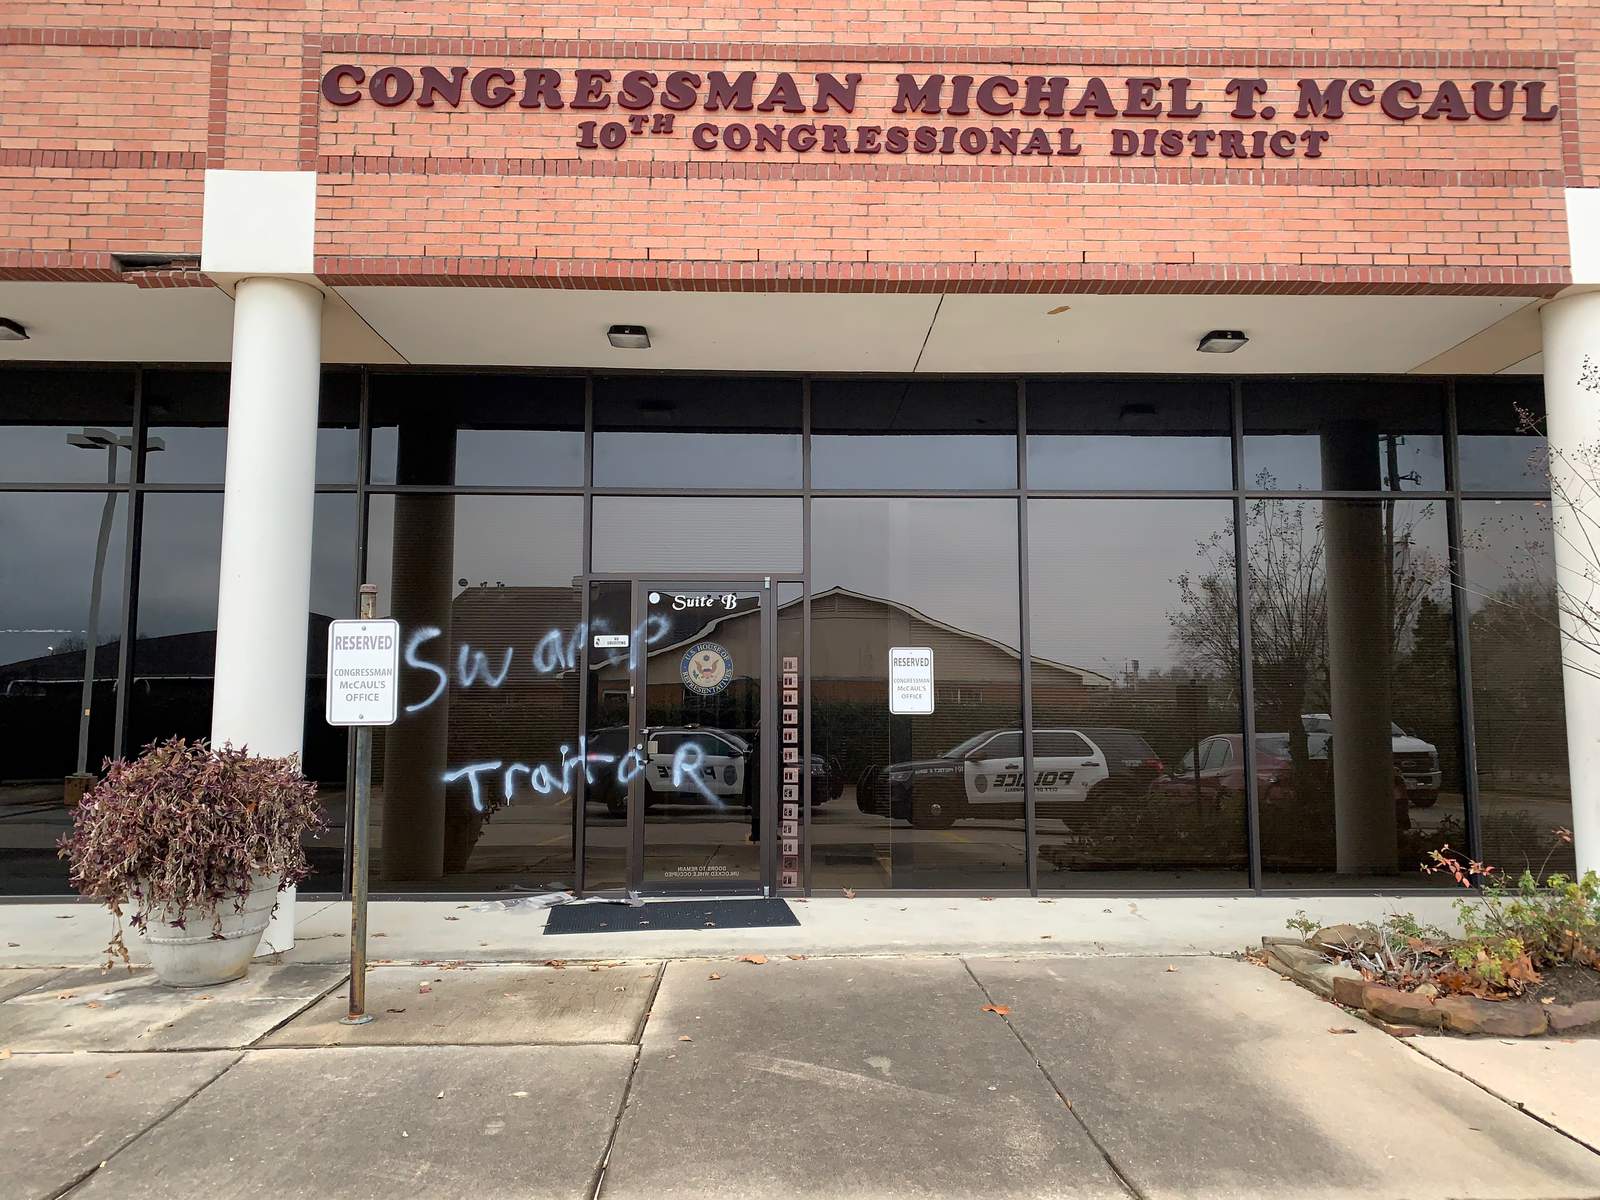 Congressman Michael McCaul’s district office in Tomball vandalized